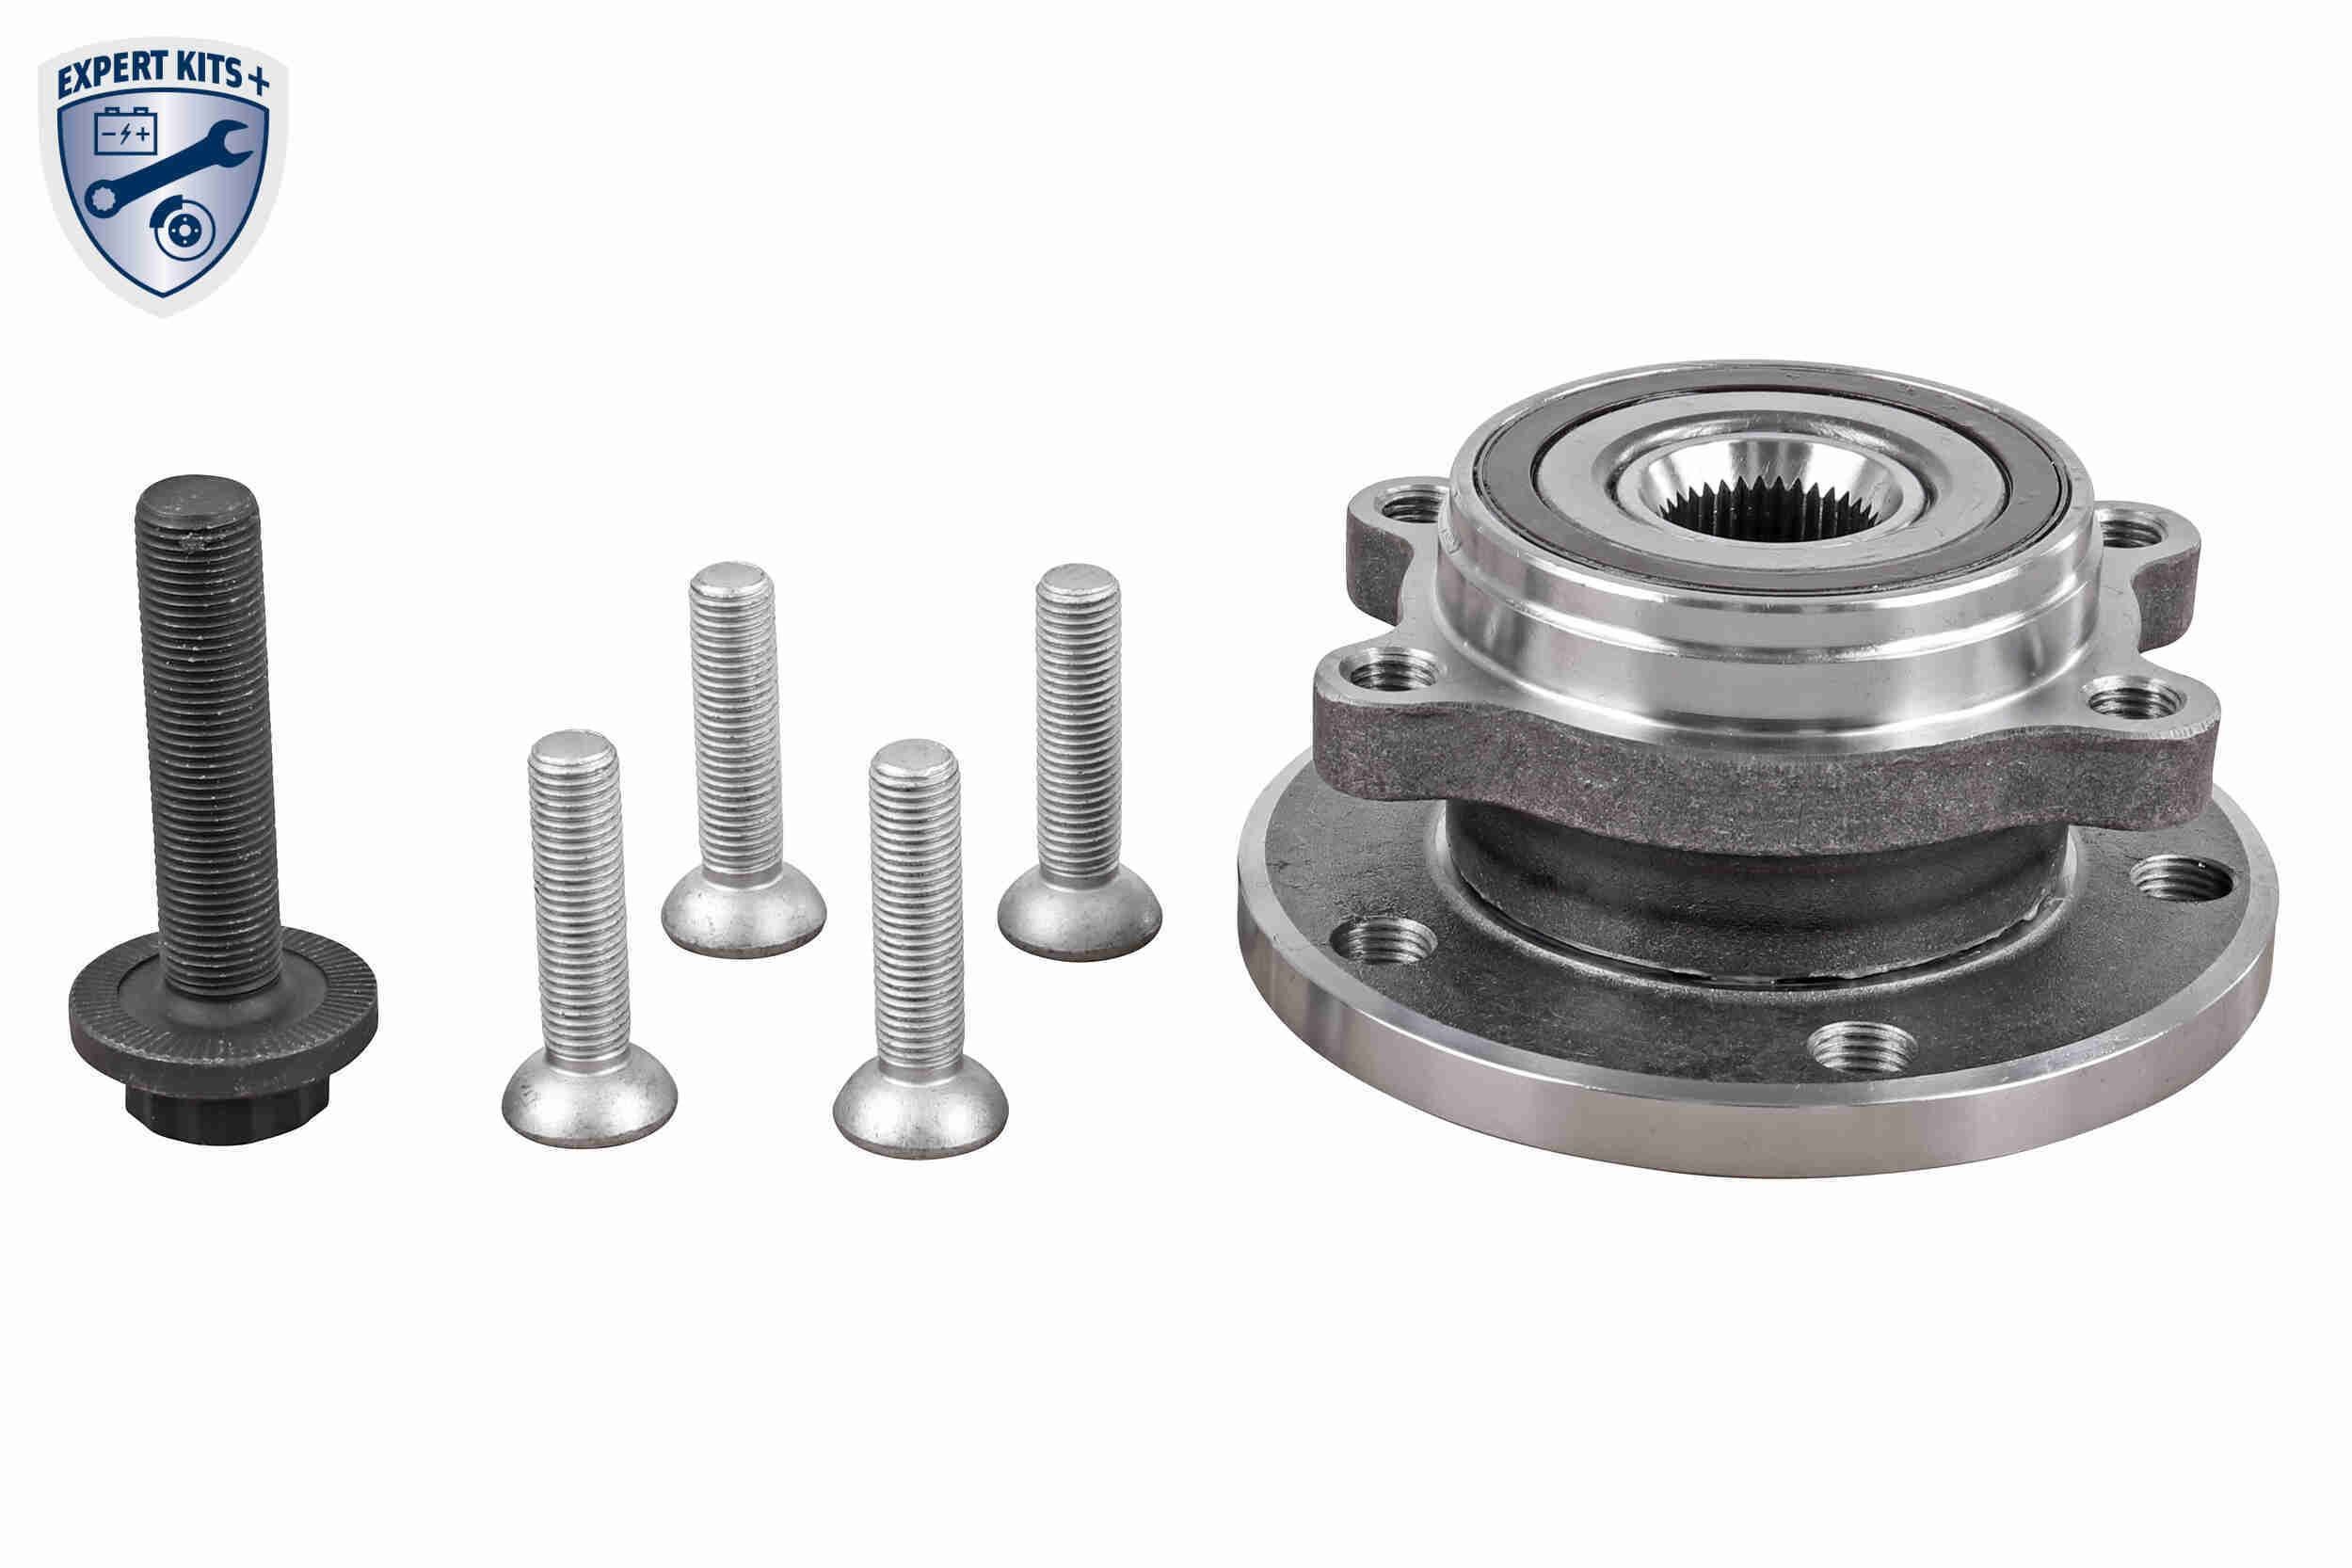 VAICO V10-0497 Wheel bearing kit Front Axle, EXPERT KITS +, with integrated magnetic sensor ring, 136,5 mm